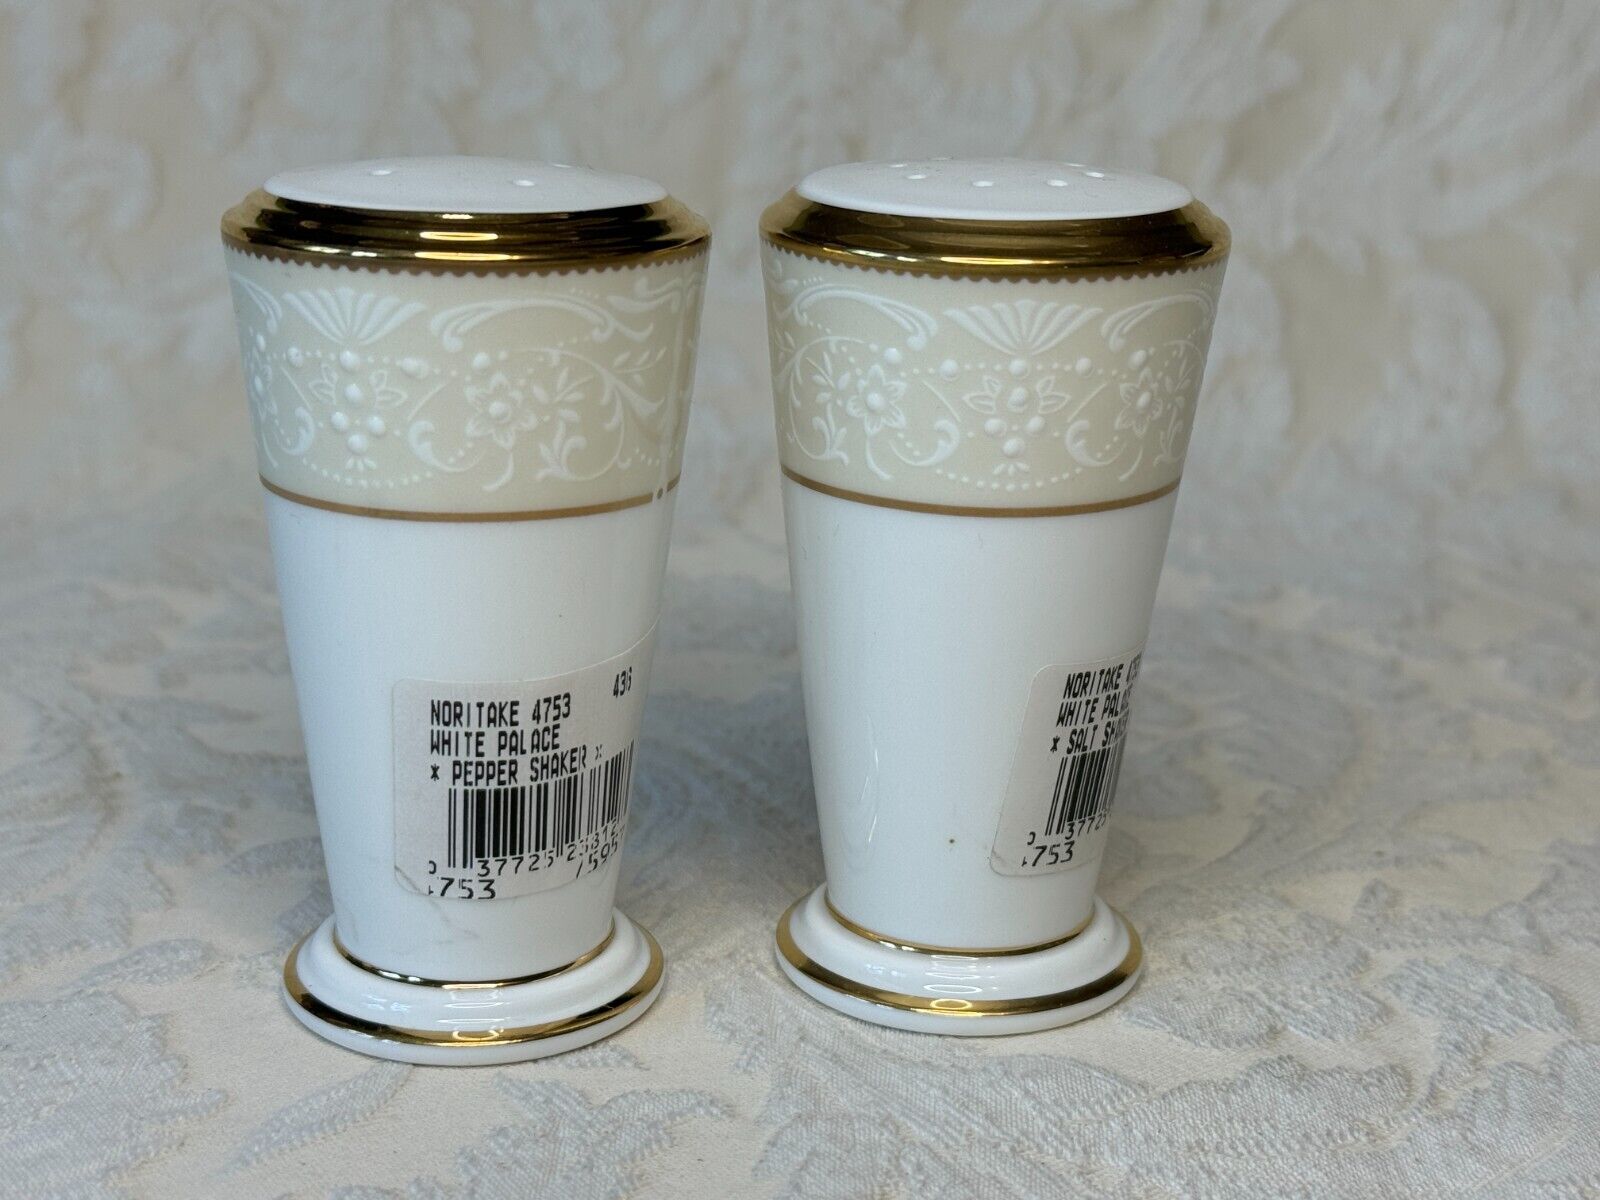 NORITAKE WHITE PALACE SALT & PEPPER SHAKERS NEW WITH TAGS - PERFECT